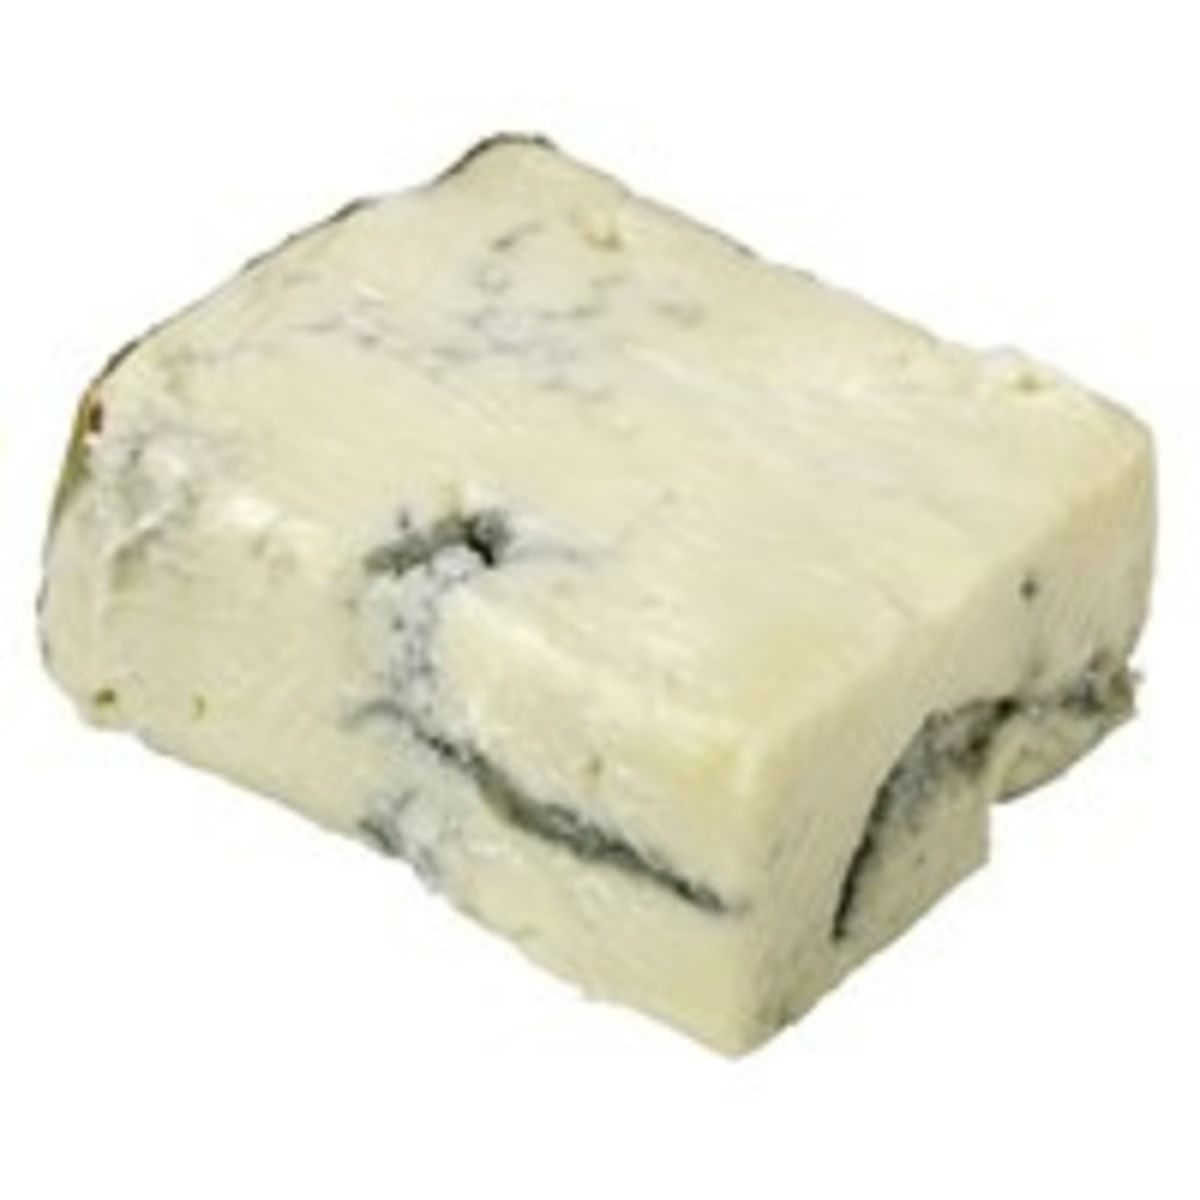 Calories in Gelmini Gorgonzola Dolce Blue Cheese